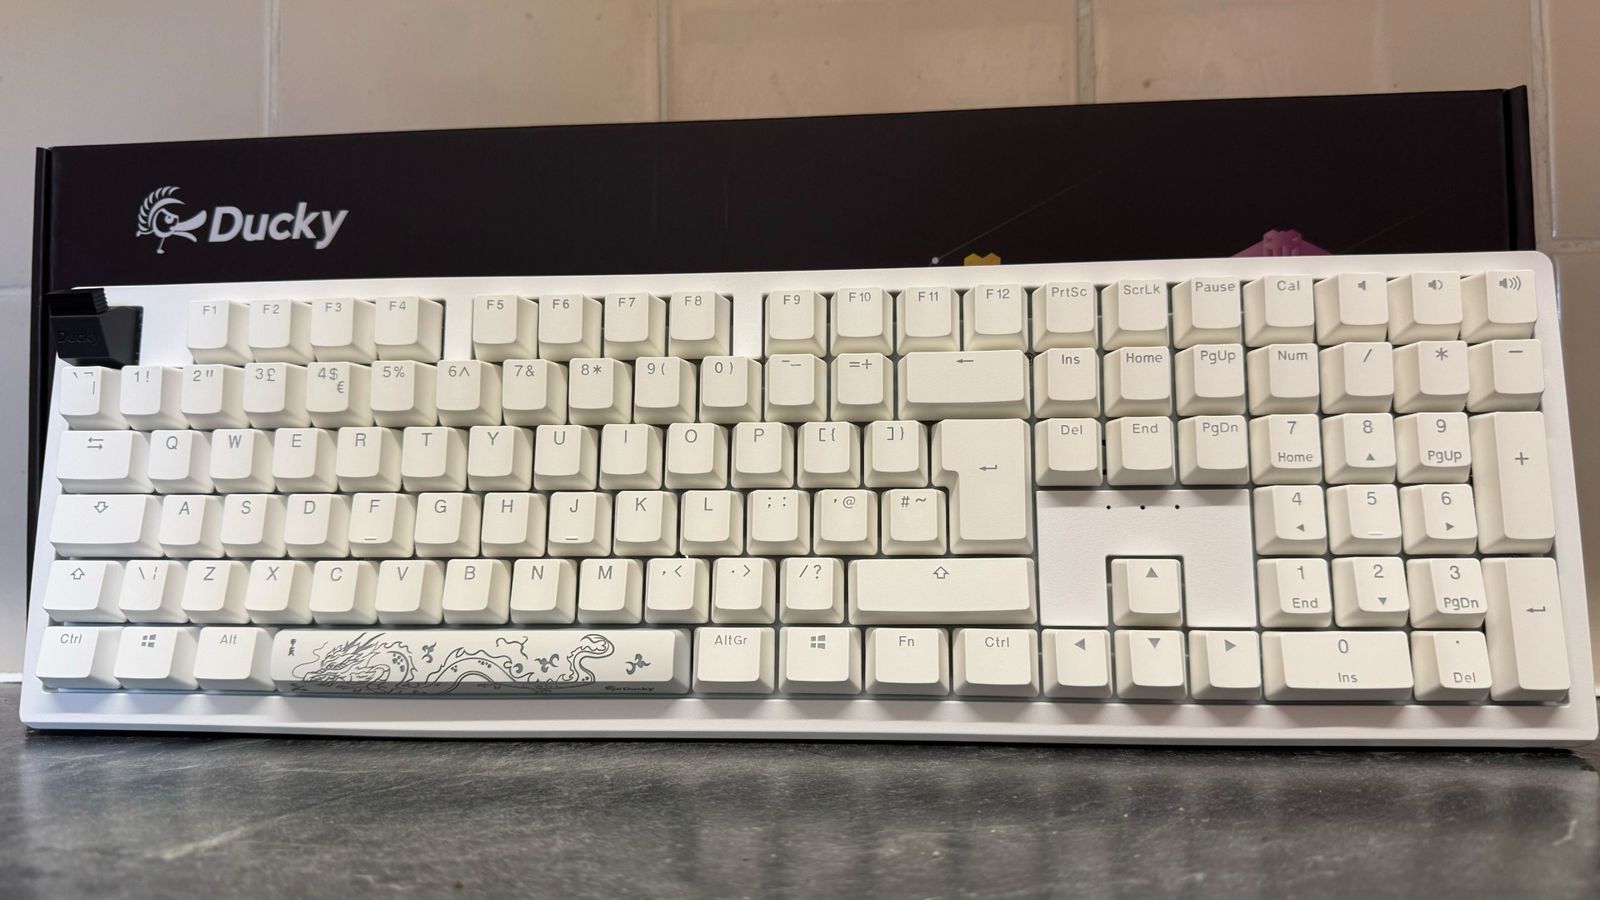 Ducky Zero 6108 in an all-white colorway in front of its box and a tiled wall